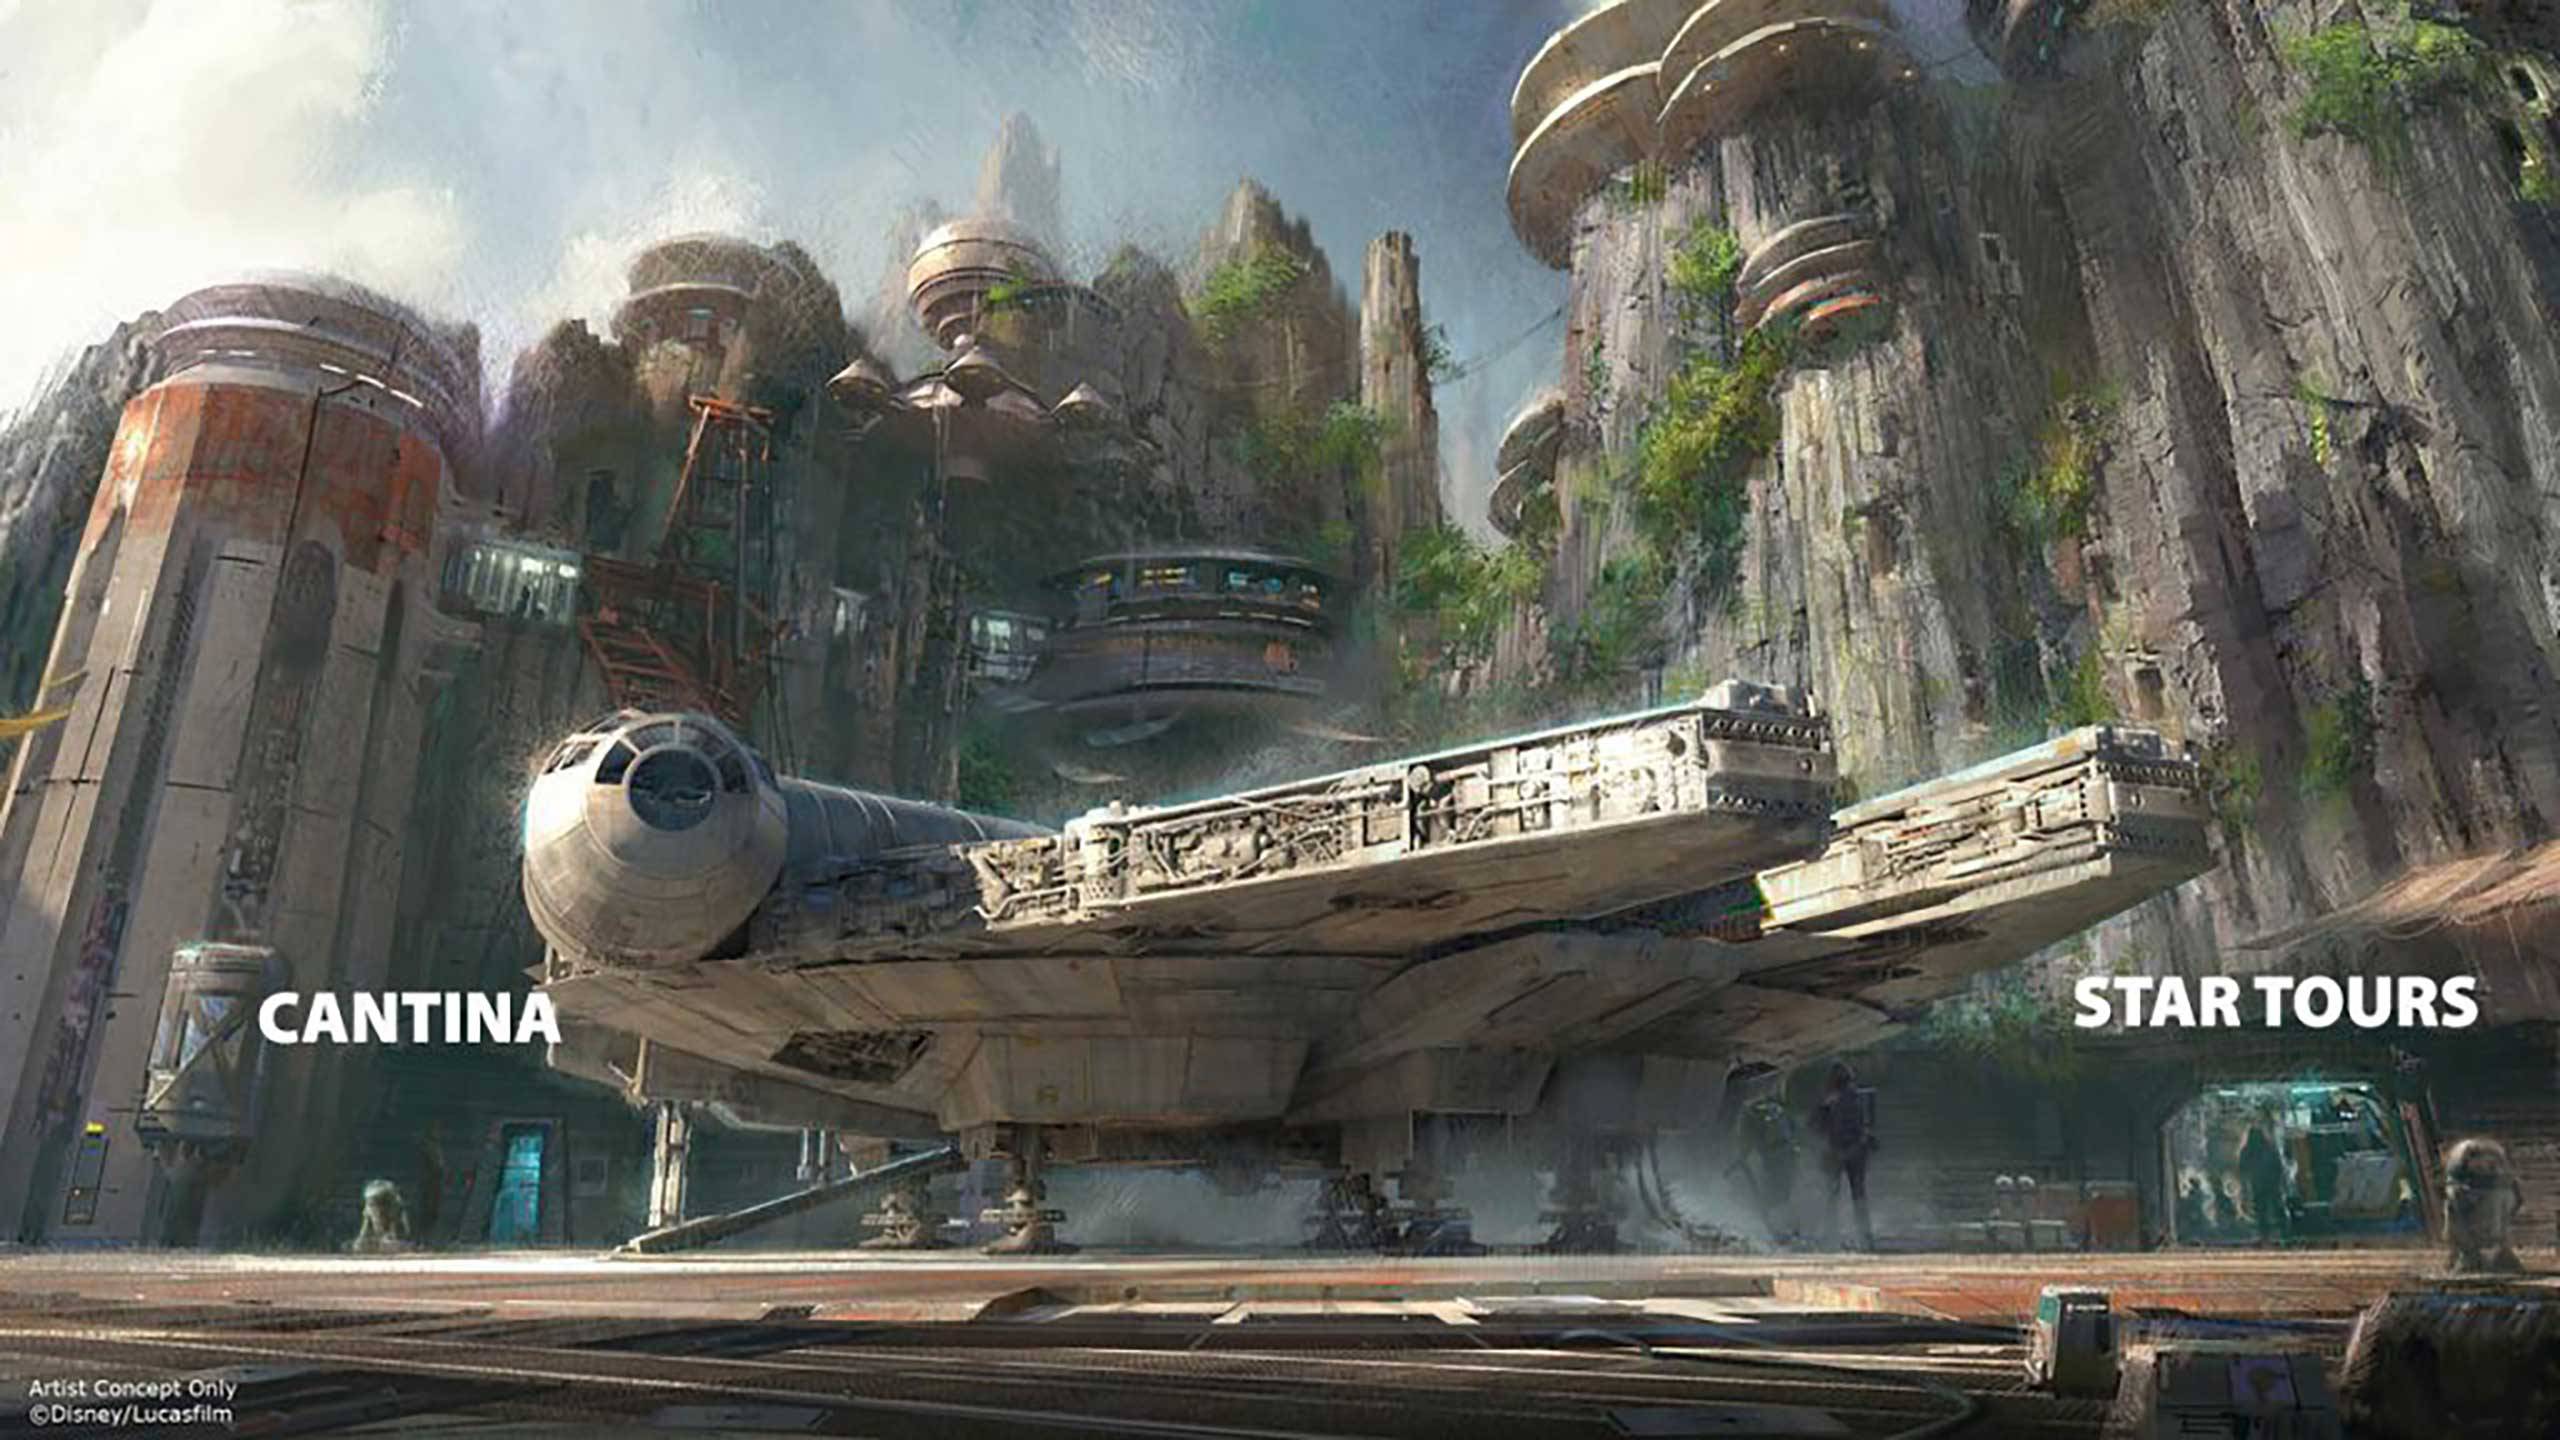 Possible attraction layout at Star Wars Land in Disney's Hollywood Studios. By Ignohippo.